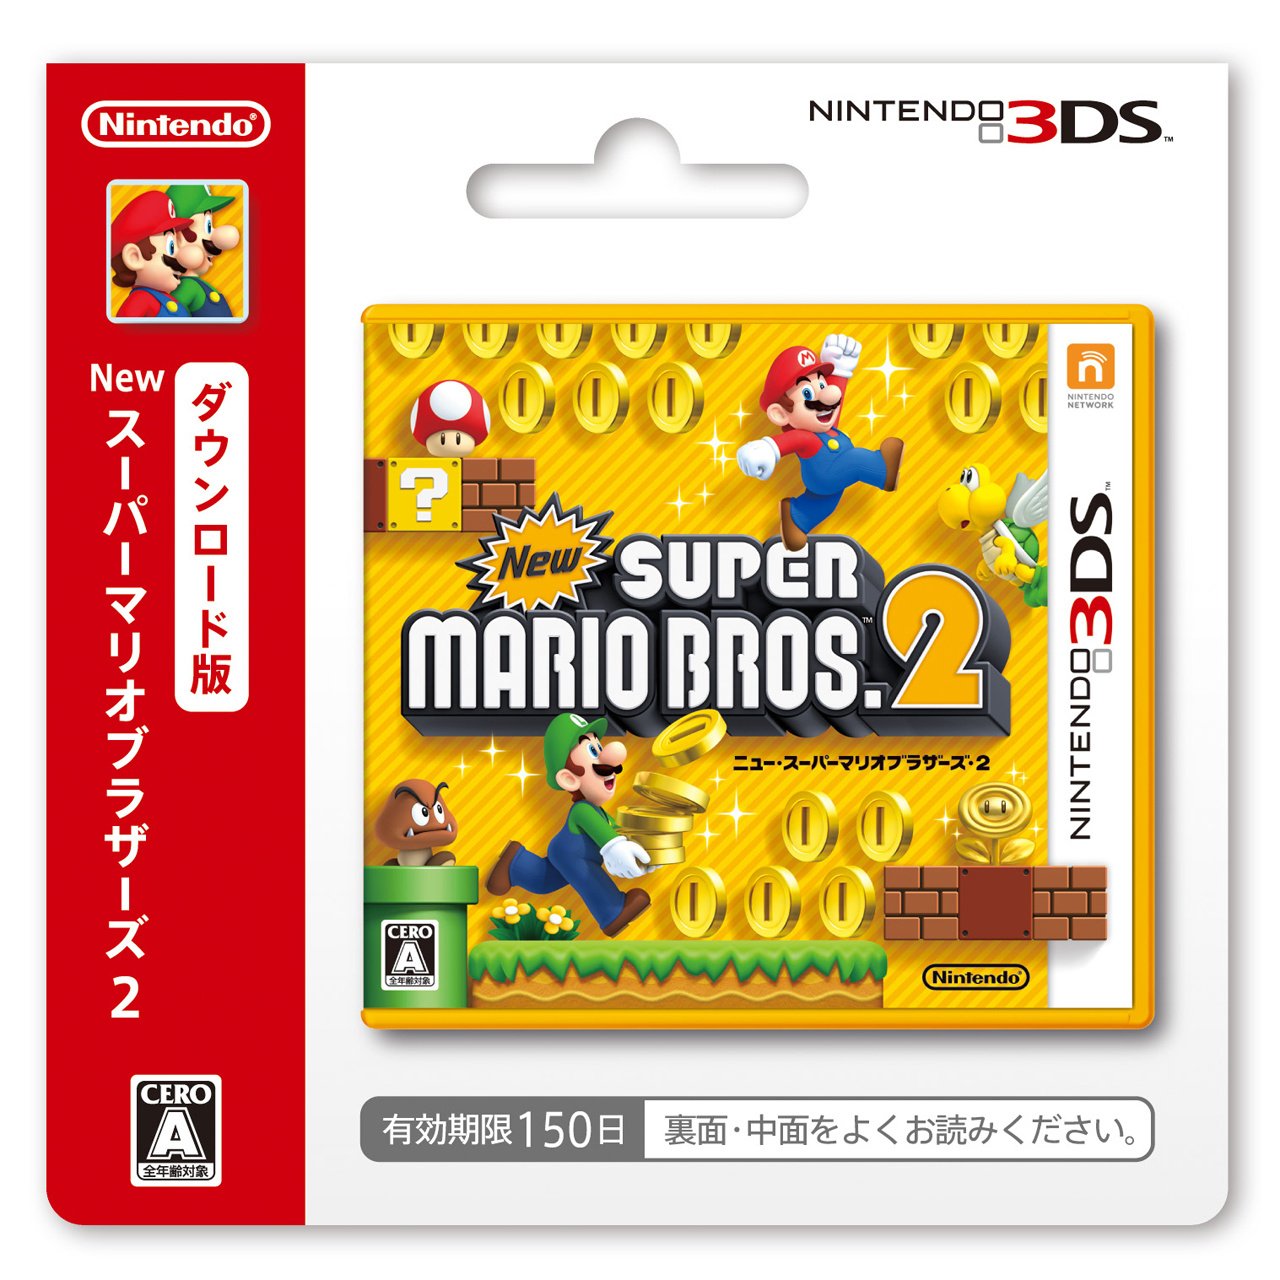 Nintendo Offering Incentives For Retail Downloads In Japan.